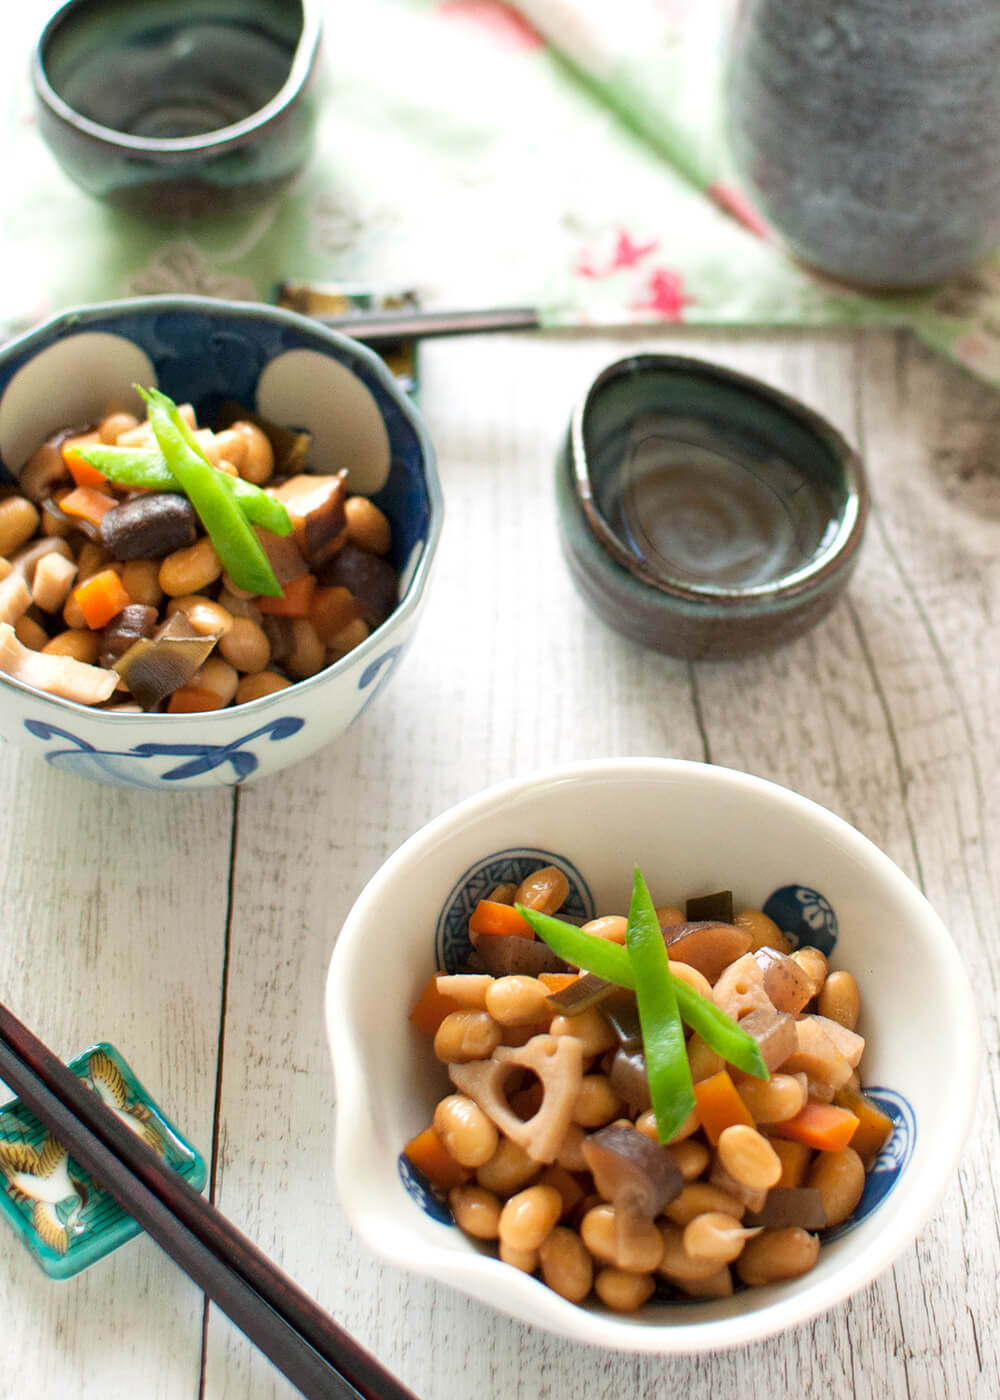 Gomoku-mame (五目豆, Simmered Soybeans with Vegetables) is a wonderful, healthy vegetarian dish. Soybeans are cooked with diced root vegetables in a sweet soy sauce flavour. It keeps well for several days in the fridge and you can freeze it, too.